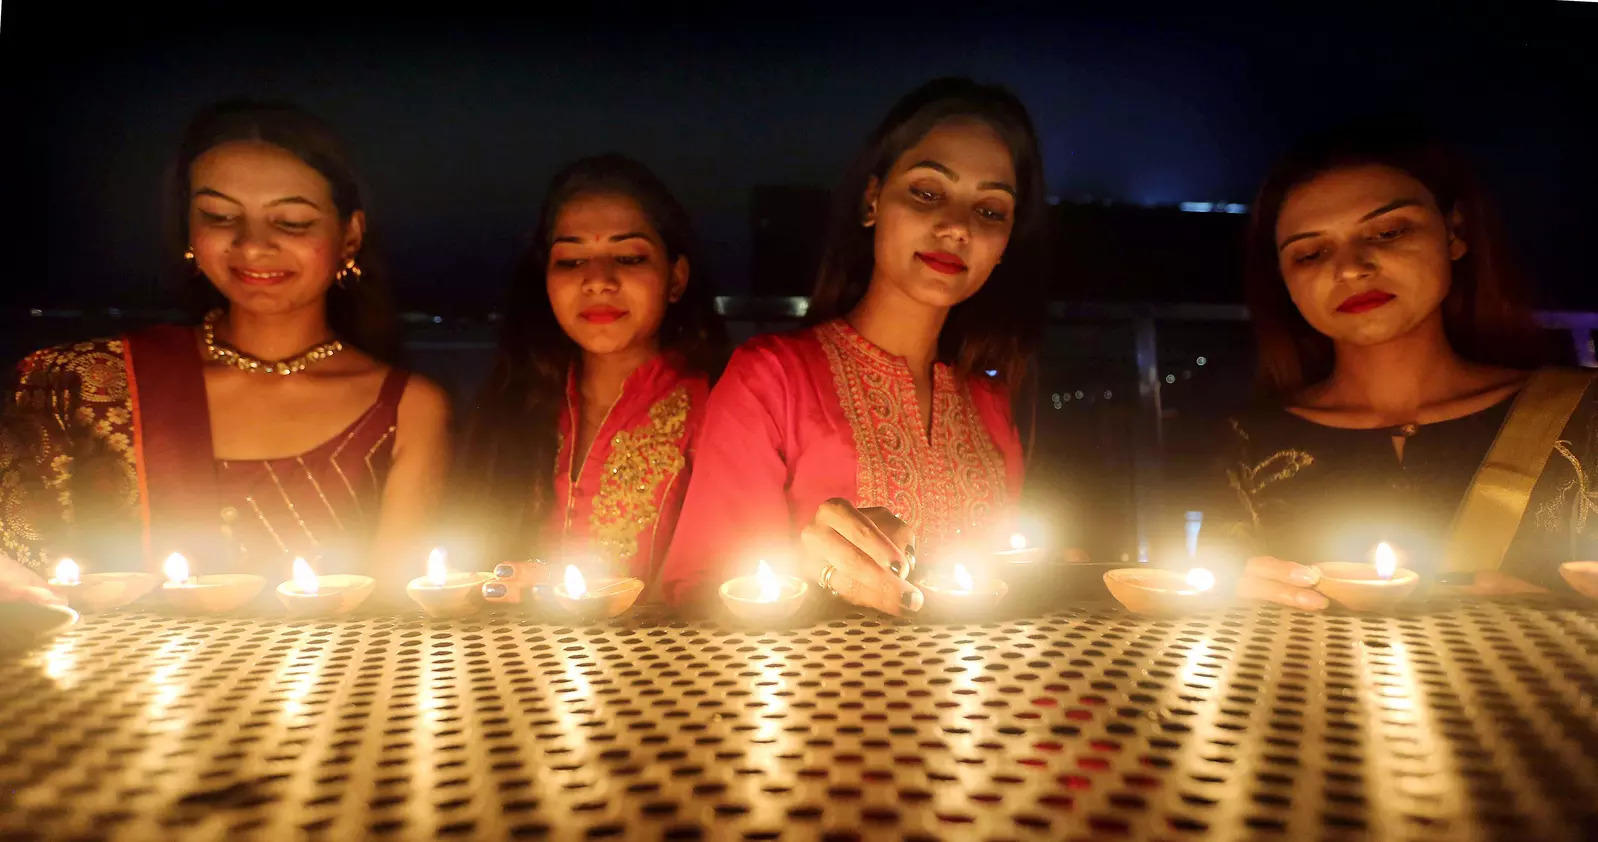 From decorating homes, illuminating historical buildings to spectacular fireworks; the nation celebrates Diwali with great fervour